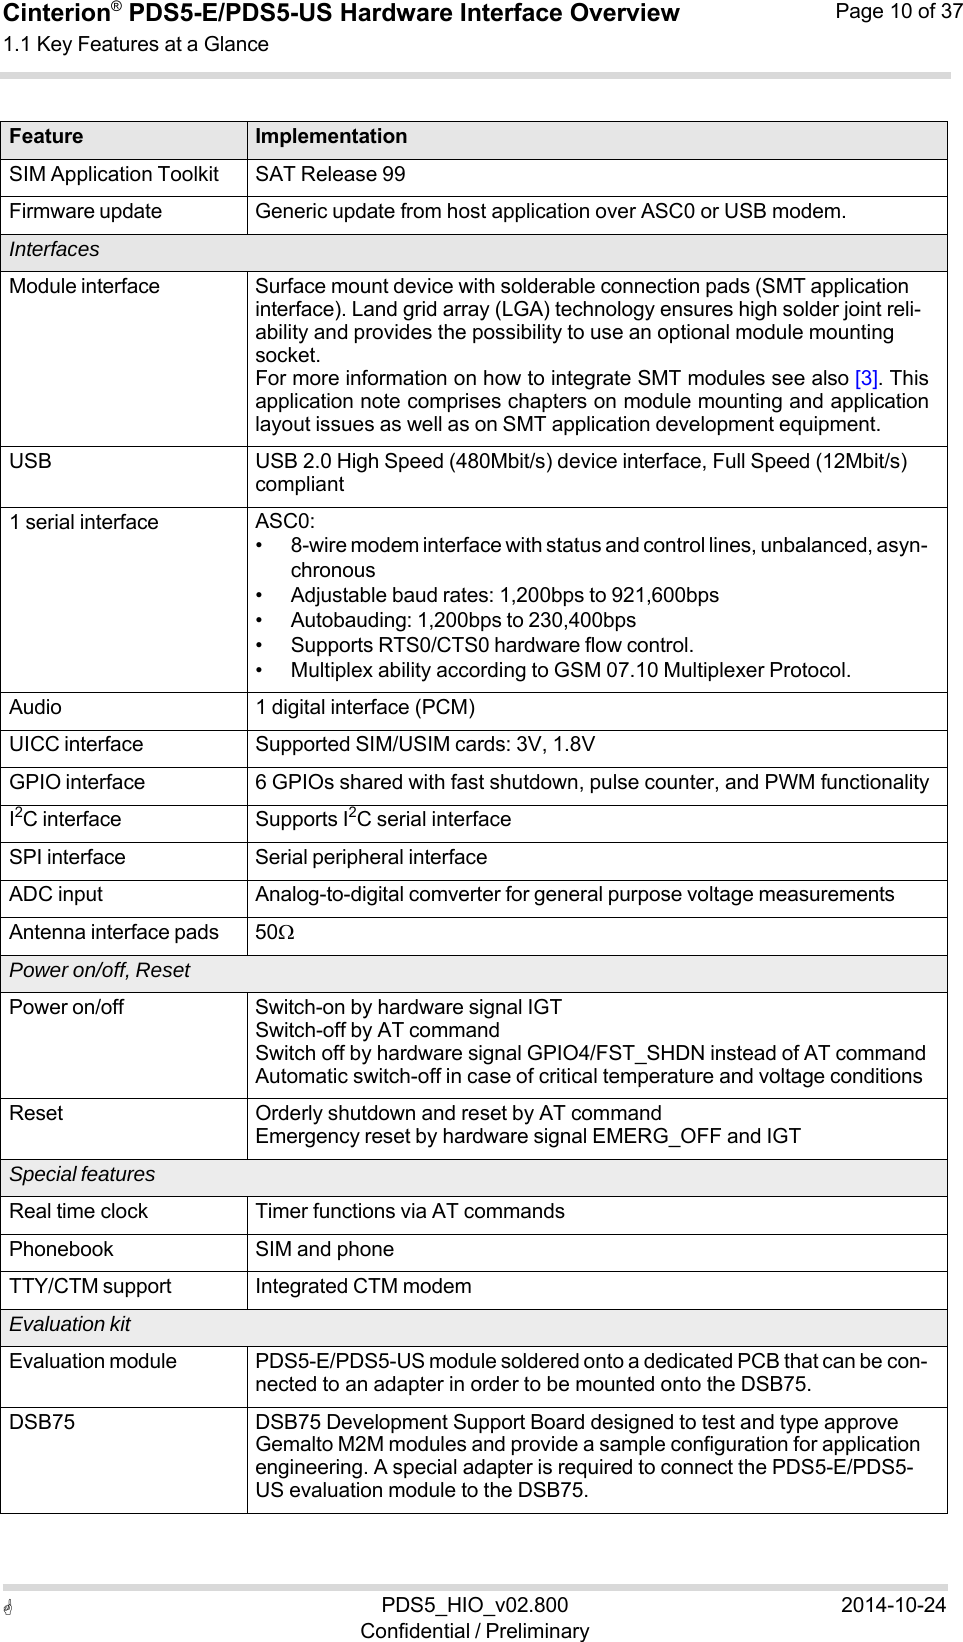  PDS5_HIO_v02.800Confidential / Preliminary2014-10-24Cinterion®  PDS5-E/PDS5-US Hardware Interface Overview1.1 Key Features at a Glance Page 10 of 37    Feature ImplementationSIM Application Toolkit SAT Release 99Firmware update Generic update from host application over ASC0 or USB modem. Interfaces Module interface Surface mount device with solderable connection pads (SMT application interface). Land grid array (LGA) technology ensures high solder joint reli- ability and provides the possibility to use an optional module mounting socket. For more information on how to integrate SMT modules see also [3]. This application note comprises chapters on module mounting and application layout issues as well as on SMT application development equipment. USB USB 2.0 High Speed (480Mbit/s) device interface, Full Speed (12Mbit/s) compliant 1 serial interface ASC0: • 8-wire modem interface with status and control lines, unbalanced, asyn- chronous • Adjustable baud rates: 1,200bps to 921,600bps • Autobauding: 1,200bps to 230,400bps • Supports RTS0/CTS0 hardware flow control. • Multiplex ability according to GSM 07.10 Multiplexer Protocol. Audio 1 digital interface (PCM)UICC interface Supported SIM/USIM cards: 3V, 1.8VGPIO interface 6 GPIOs shared with fast shutdown, pulse counter, and PWM functionalityI2C interface Supports I2C serial interfaceSPI interface Serial peripheral interfaceADC input Analog-to-digital comverter for general purpose voltage measurementsAntenna interface pads 50 Power on/off, Reset Power on/off Switch-on by hardware signal IGT Switch-off by AT command Switch off by hardware signal GPIO4/FST_SHDN instead of AT command Automatic switch-off in case of critical temperature and voltage conditions Reset Orderly shutdown and reset by AT command Emergency reset by hardware signal EMERG_OFF and IGT Special features Real time clock Timer functions via AT commandsPhonebook SIM and phoneTTY/CTM support Integrated CTM modemEvaluation kit Evaluation module PDS5-E/PDS5-US module soldered onto a dedicated PCB that can be con- nected to an adapter in order to be mounted onto the DSB75. DSB75 DSB75 Development Support Board designed to test and type approve Gemalto M2M modules and provide a sample configuration for application engineering. A special adapter is required to connect the PDS5-E/PDS5- US evaluation module to the DSB75. 